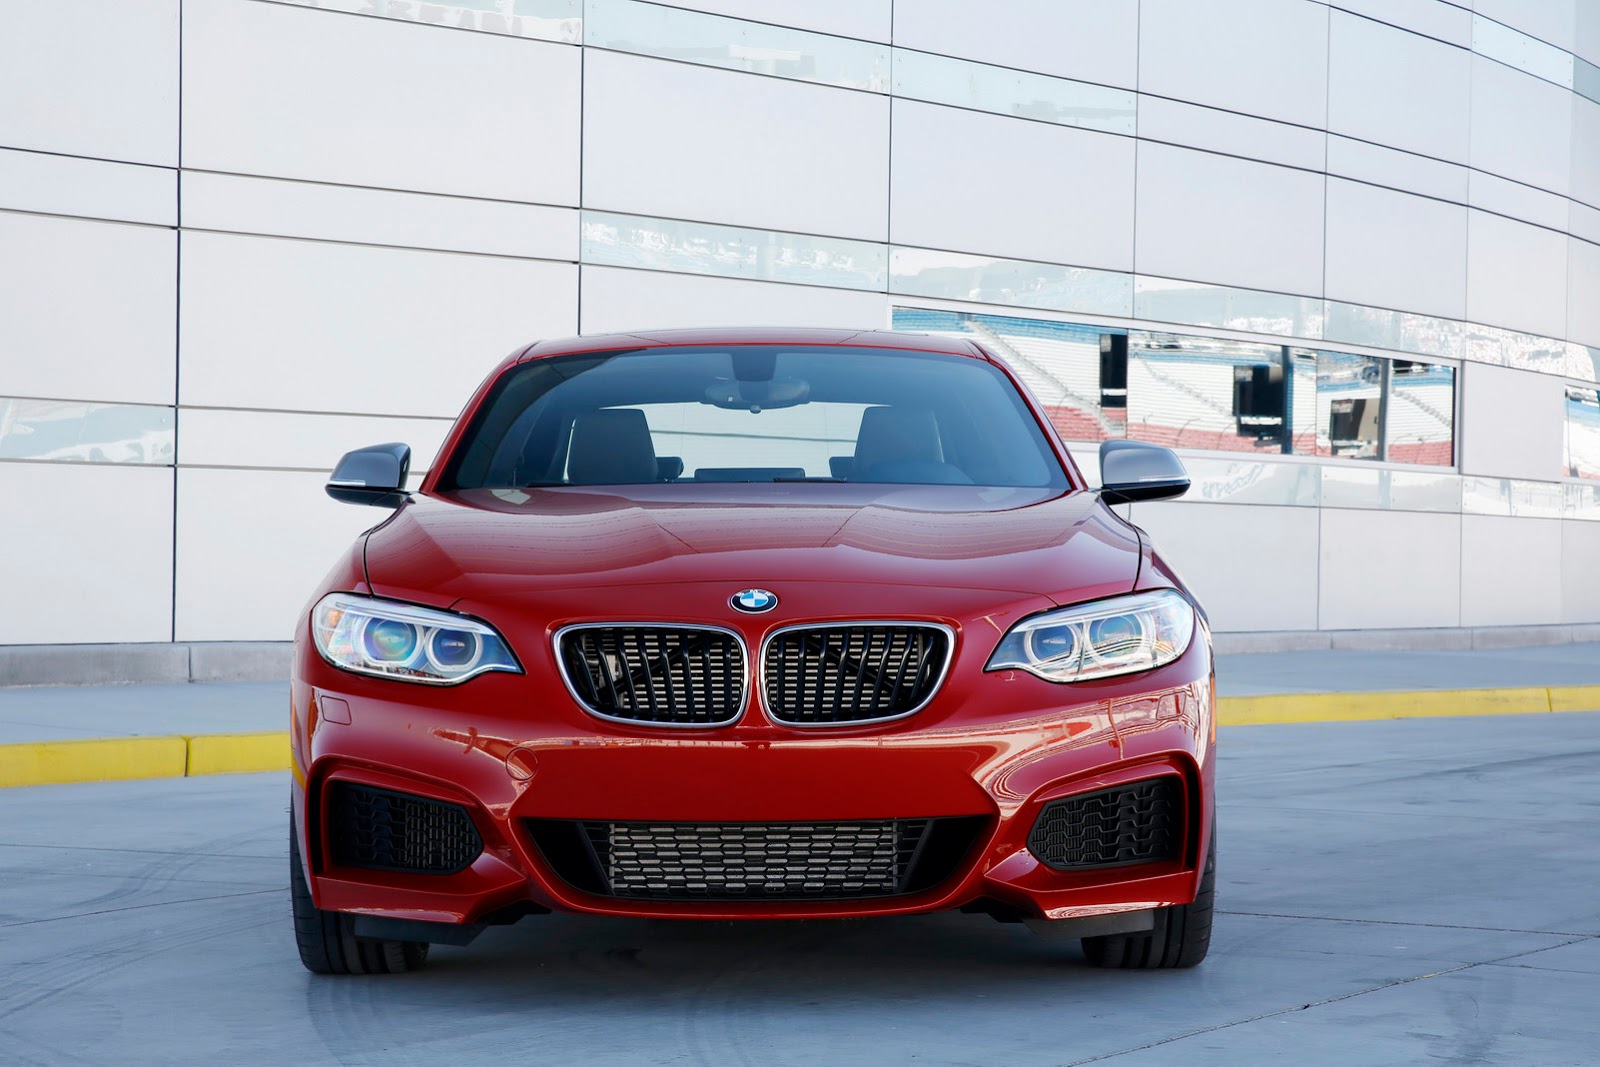 BMW M235i Might Be Replaced with the More Potent M240i